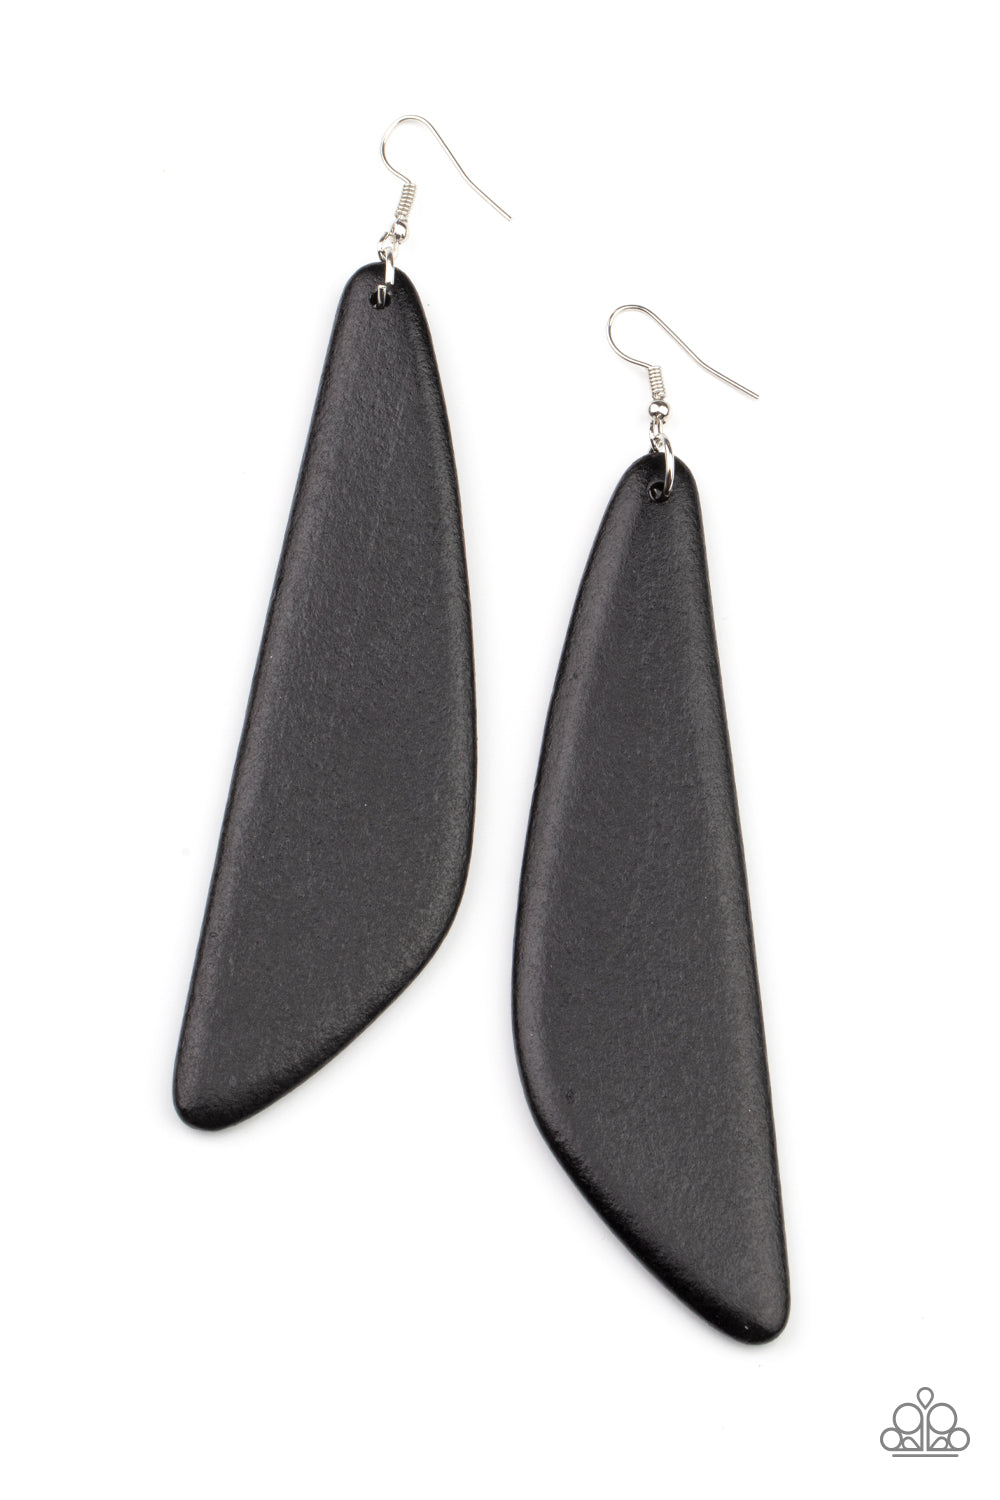 Painted in a shiny black finish, a flared wooden frame swings from the ear for a colorful summery look. Lead free and nickel-free earrings with fish hooks. Medium weight long and fancy.